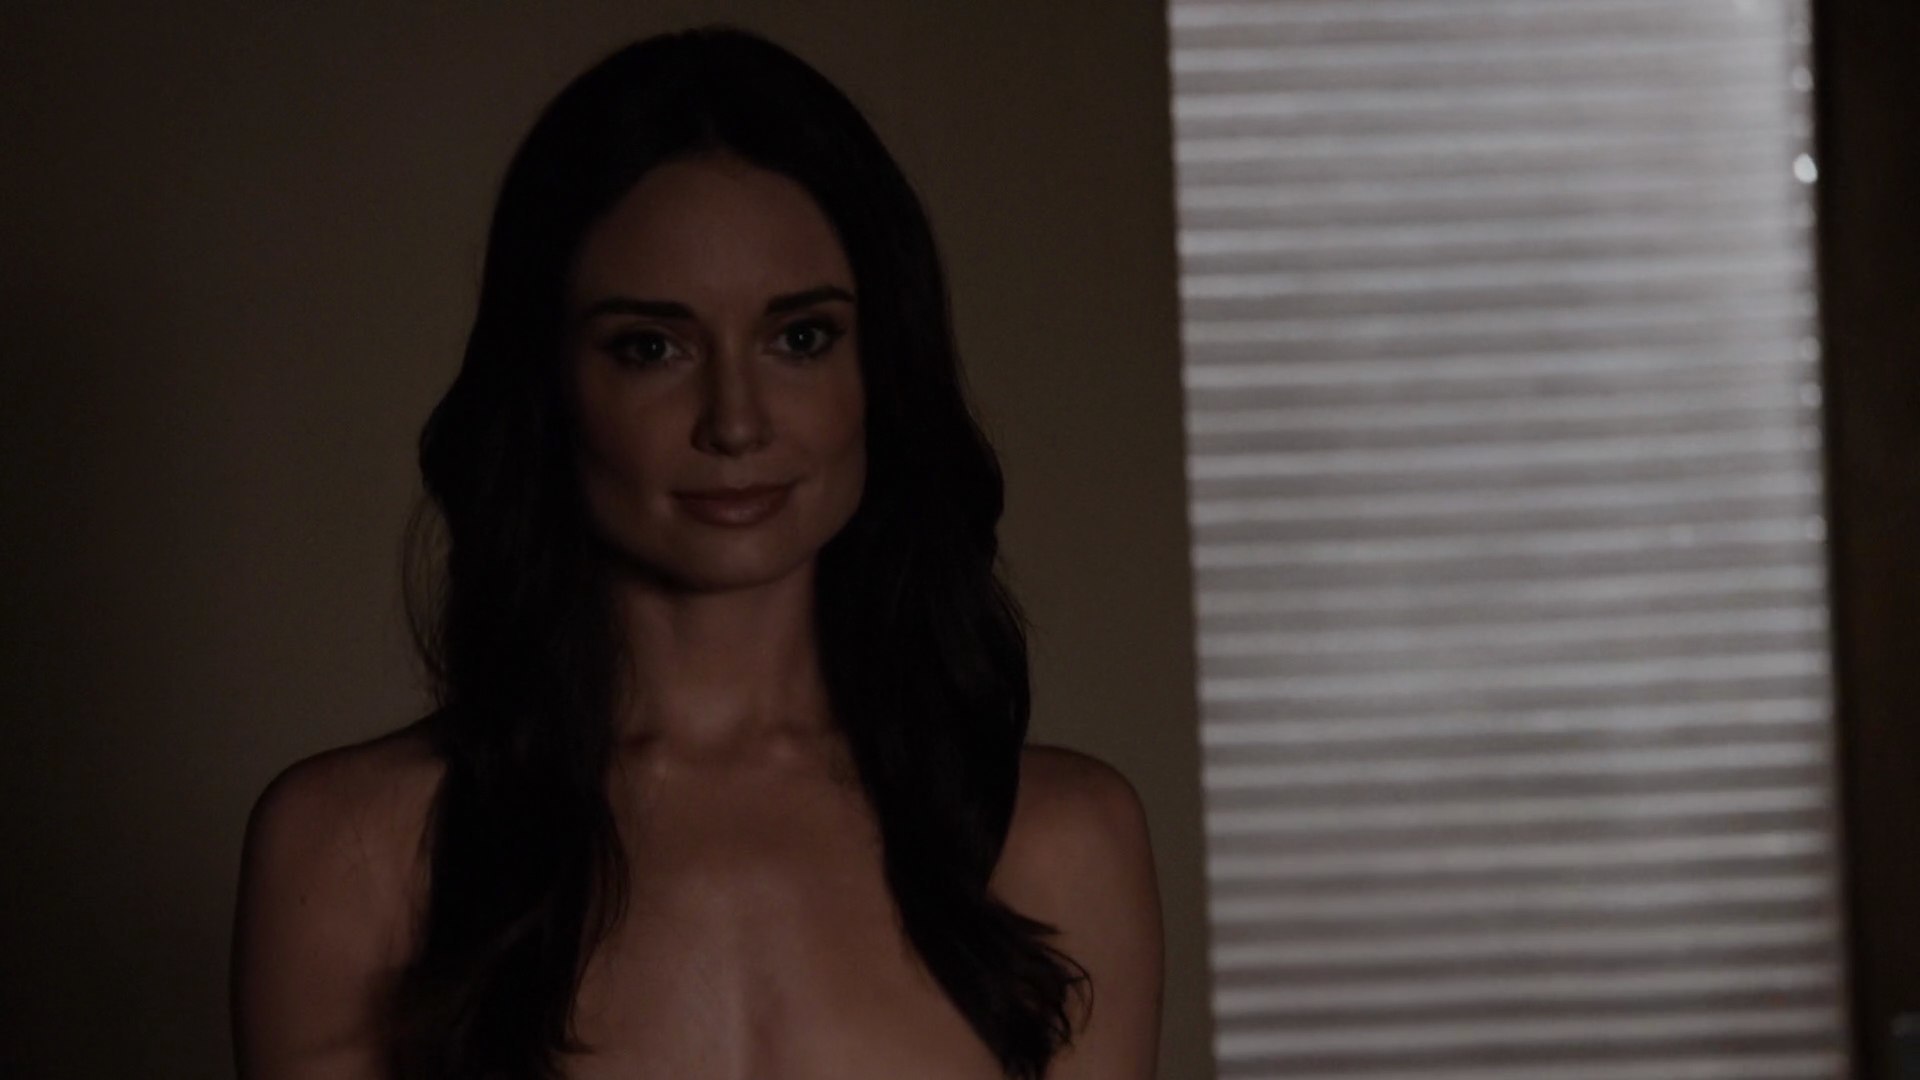 May from agents of shield naked. Hot Porno Free gallery. Comments: 1